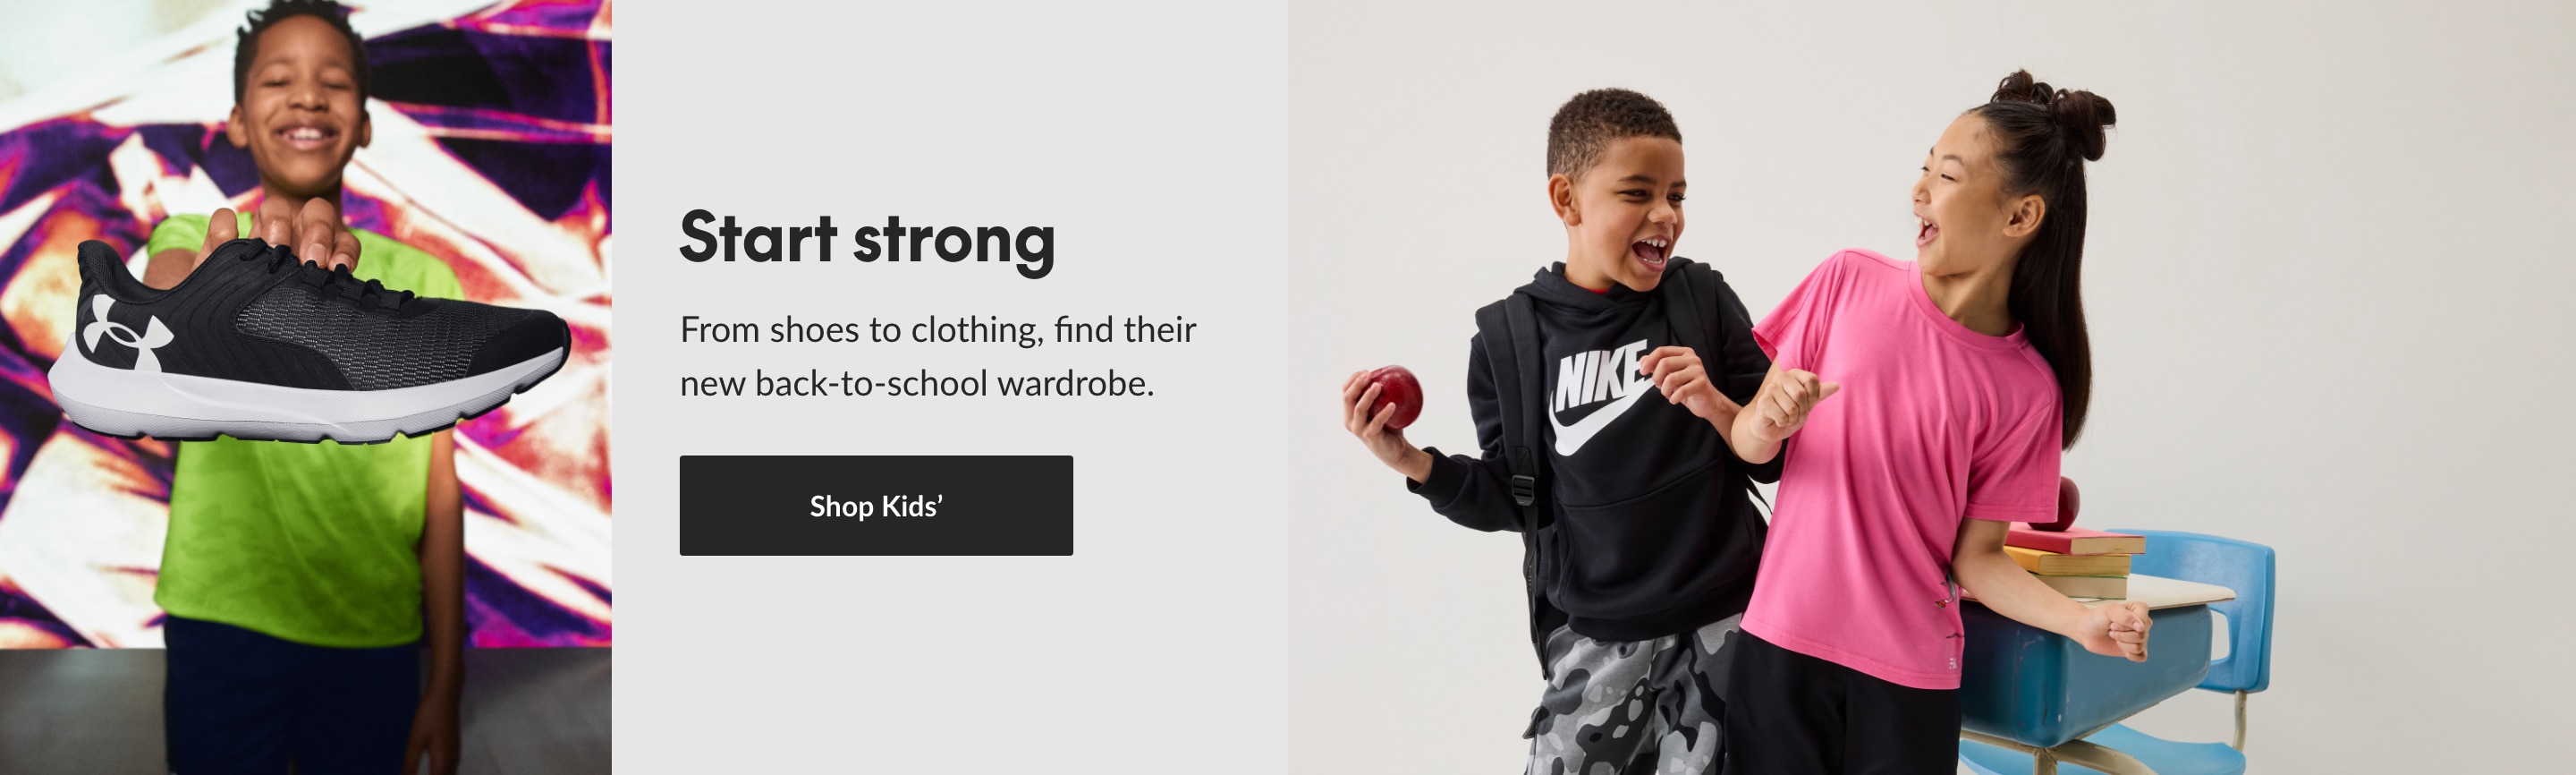 Back to School: Kids' Athletic Clothing & Shoes